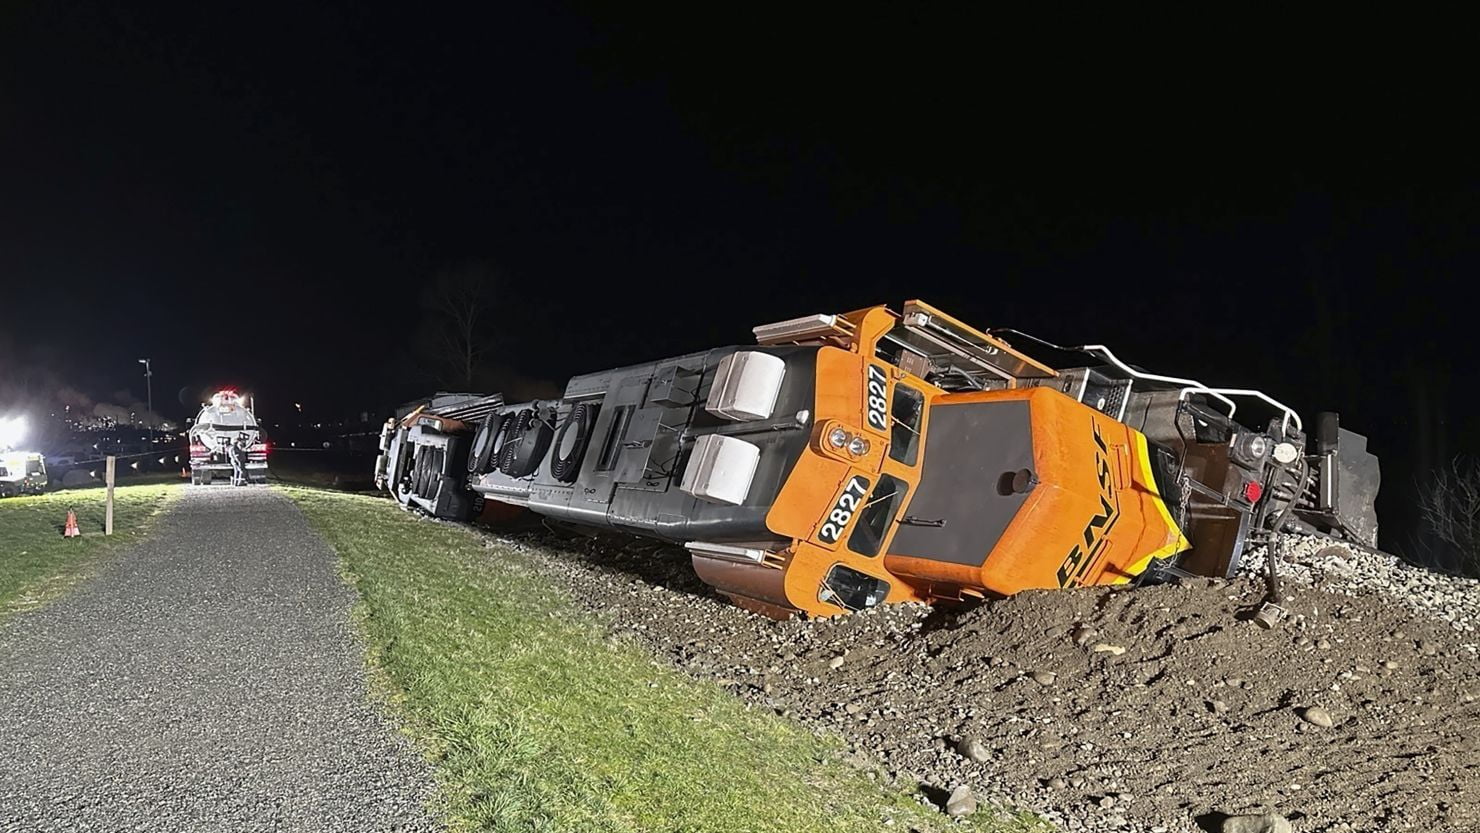 This photo provided by the Washington Department of Ecology shows a derailed BNSF train on the Swinomish tribal reservation near Anacortes, Washington, on March 16, 2023.